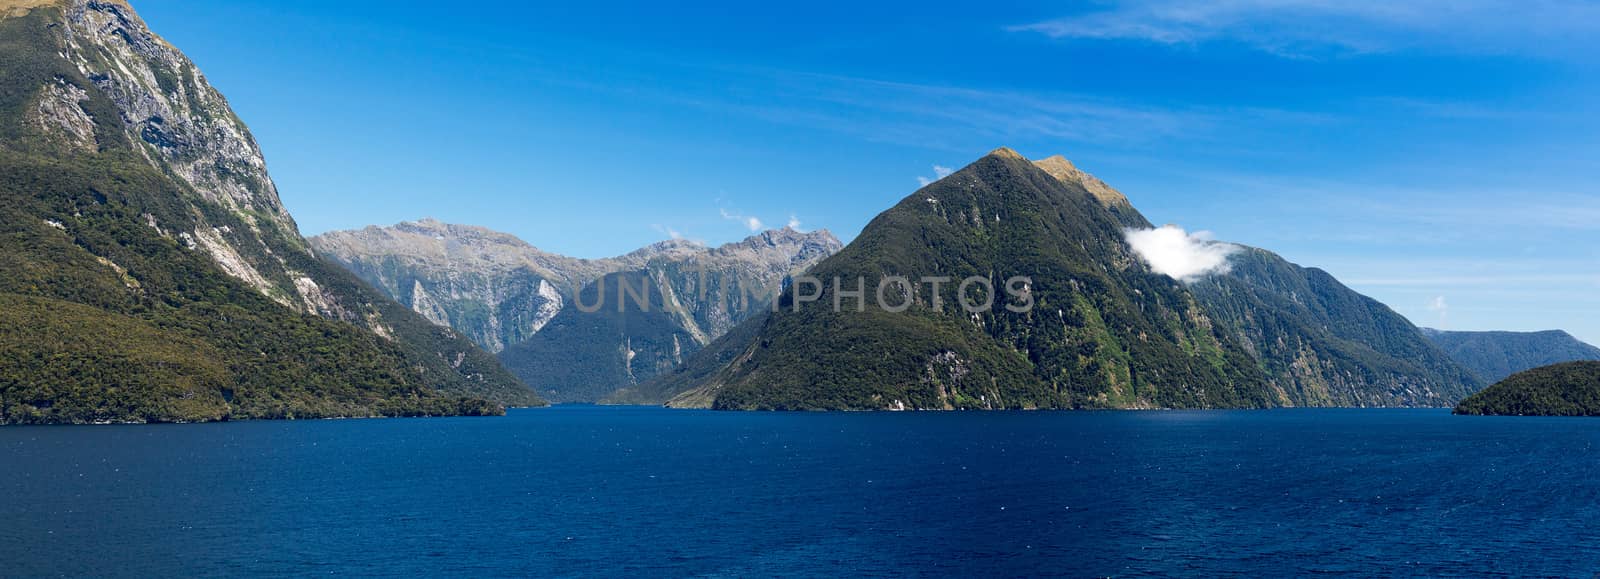 Fjord of Doubtful Sound in New Zealand by steheap